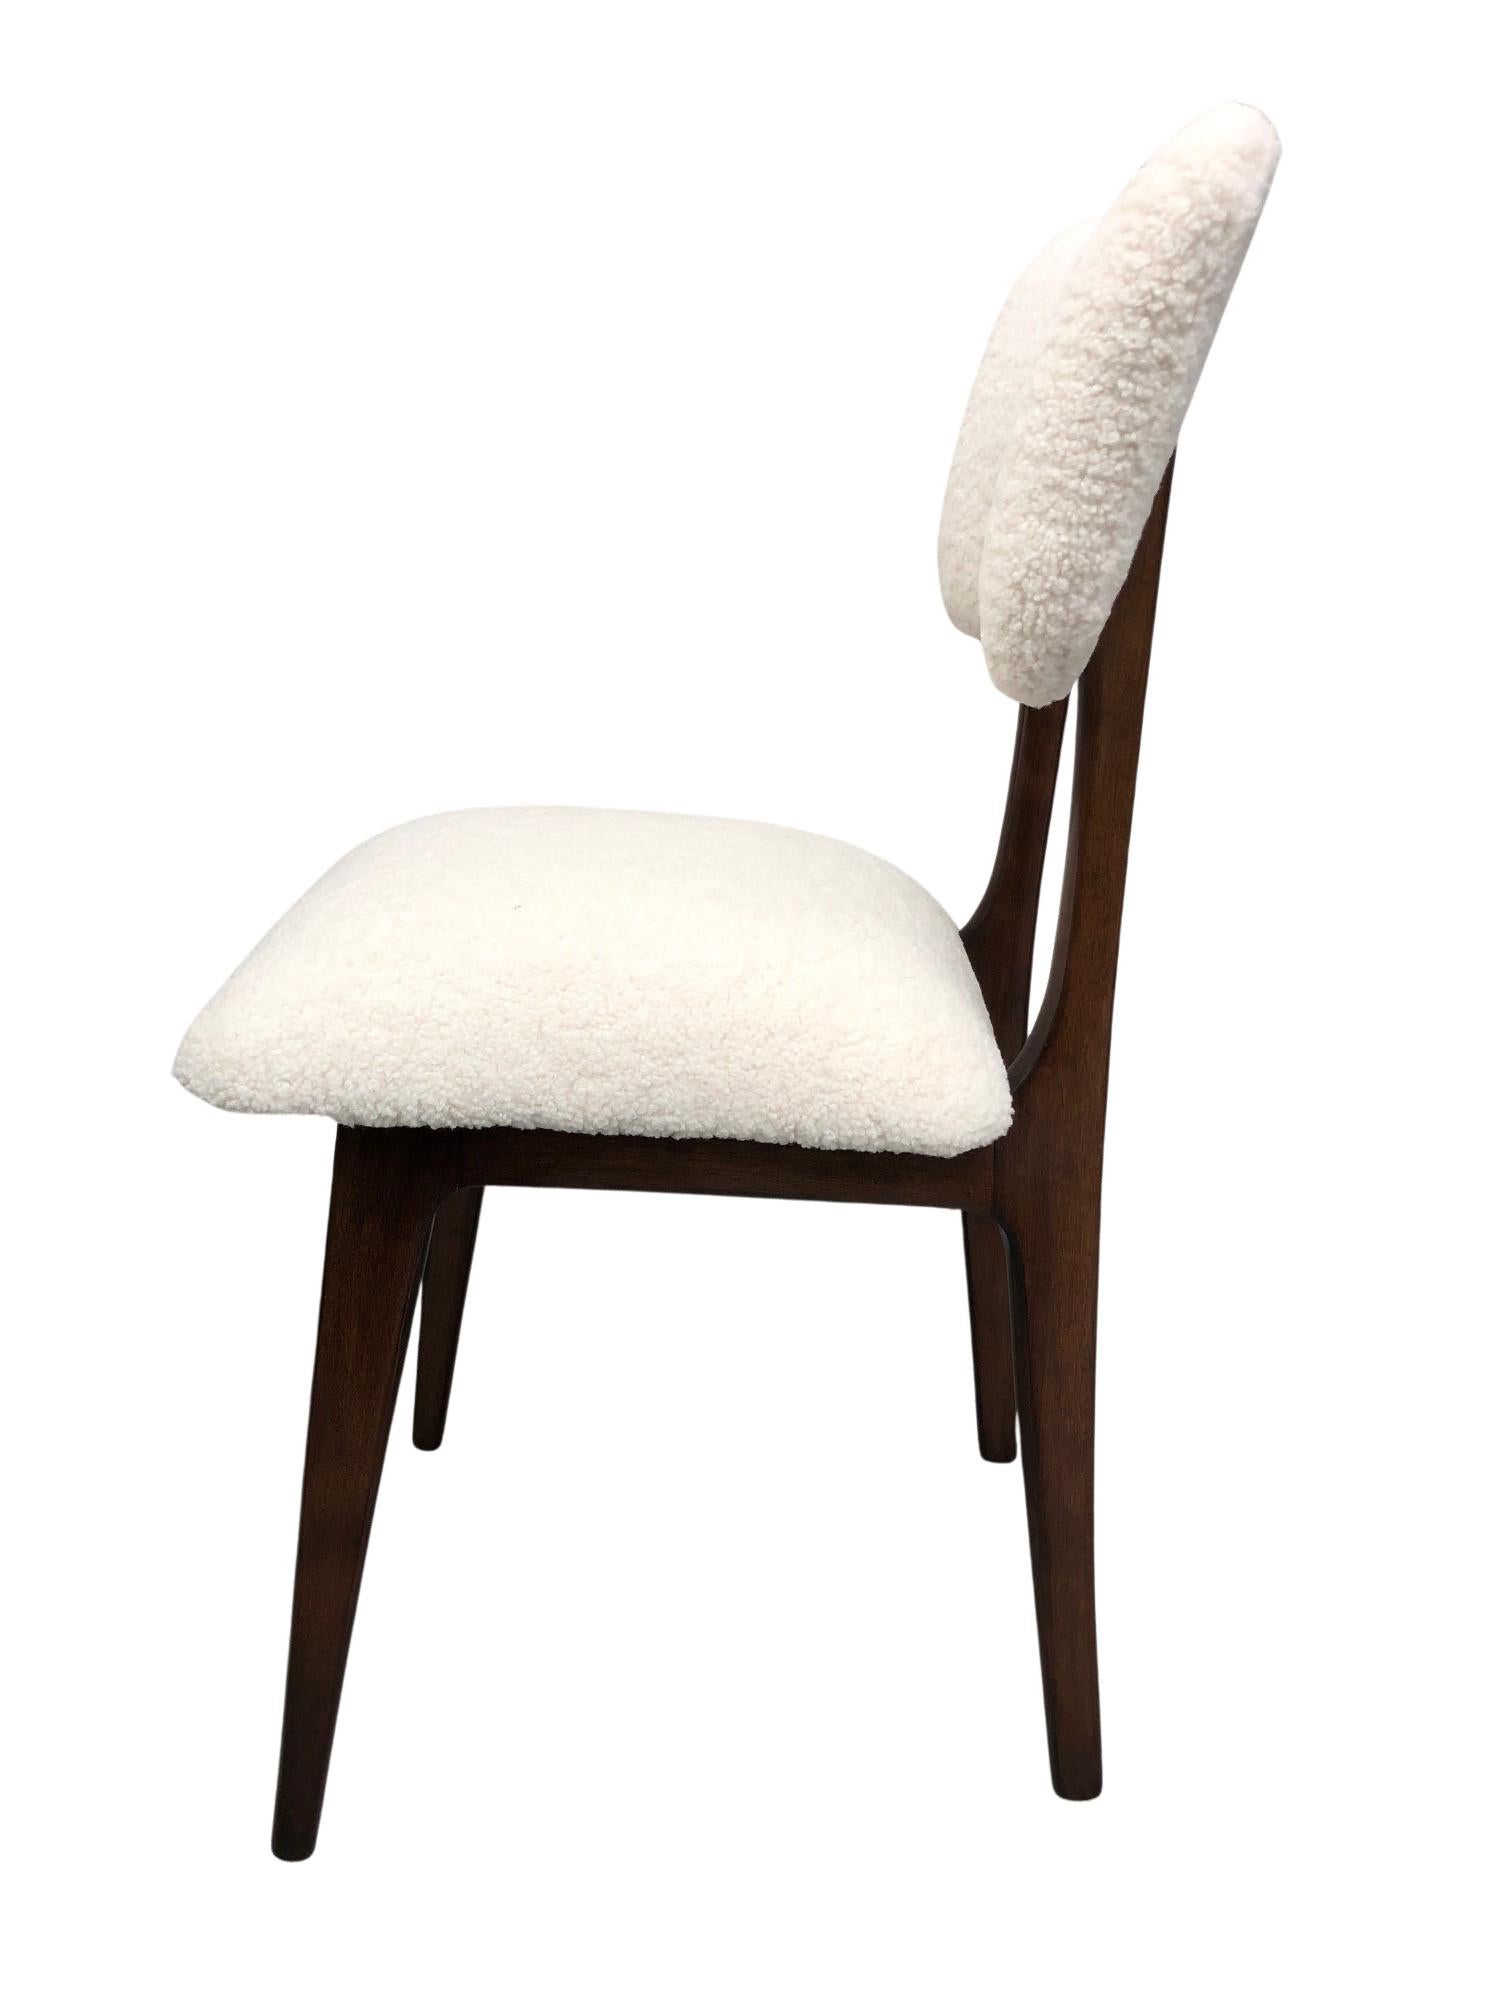 Unique set of four chairs manufactured in Poland in the 1960s, designed by Rajmund Halas. 

The upholstery is made of pleasant to touch boucle textile. It is high quality and durable italian fabric in a warm taupe (light grey light beige) color.